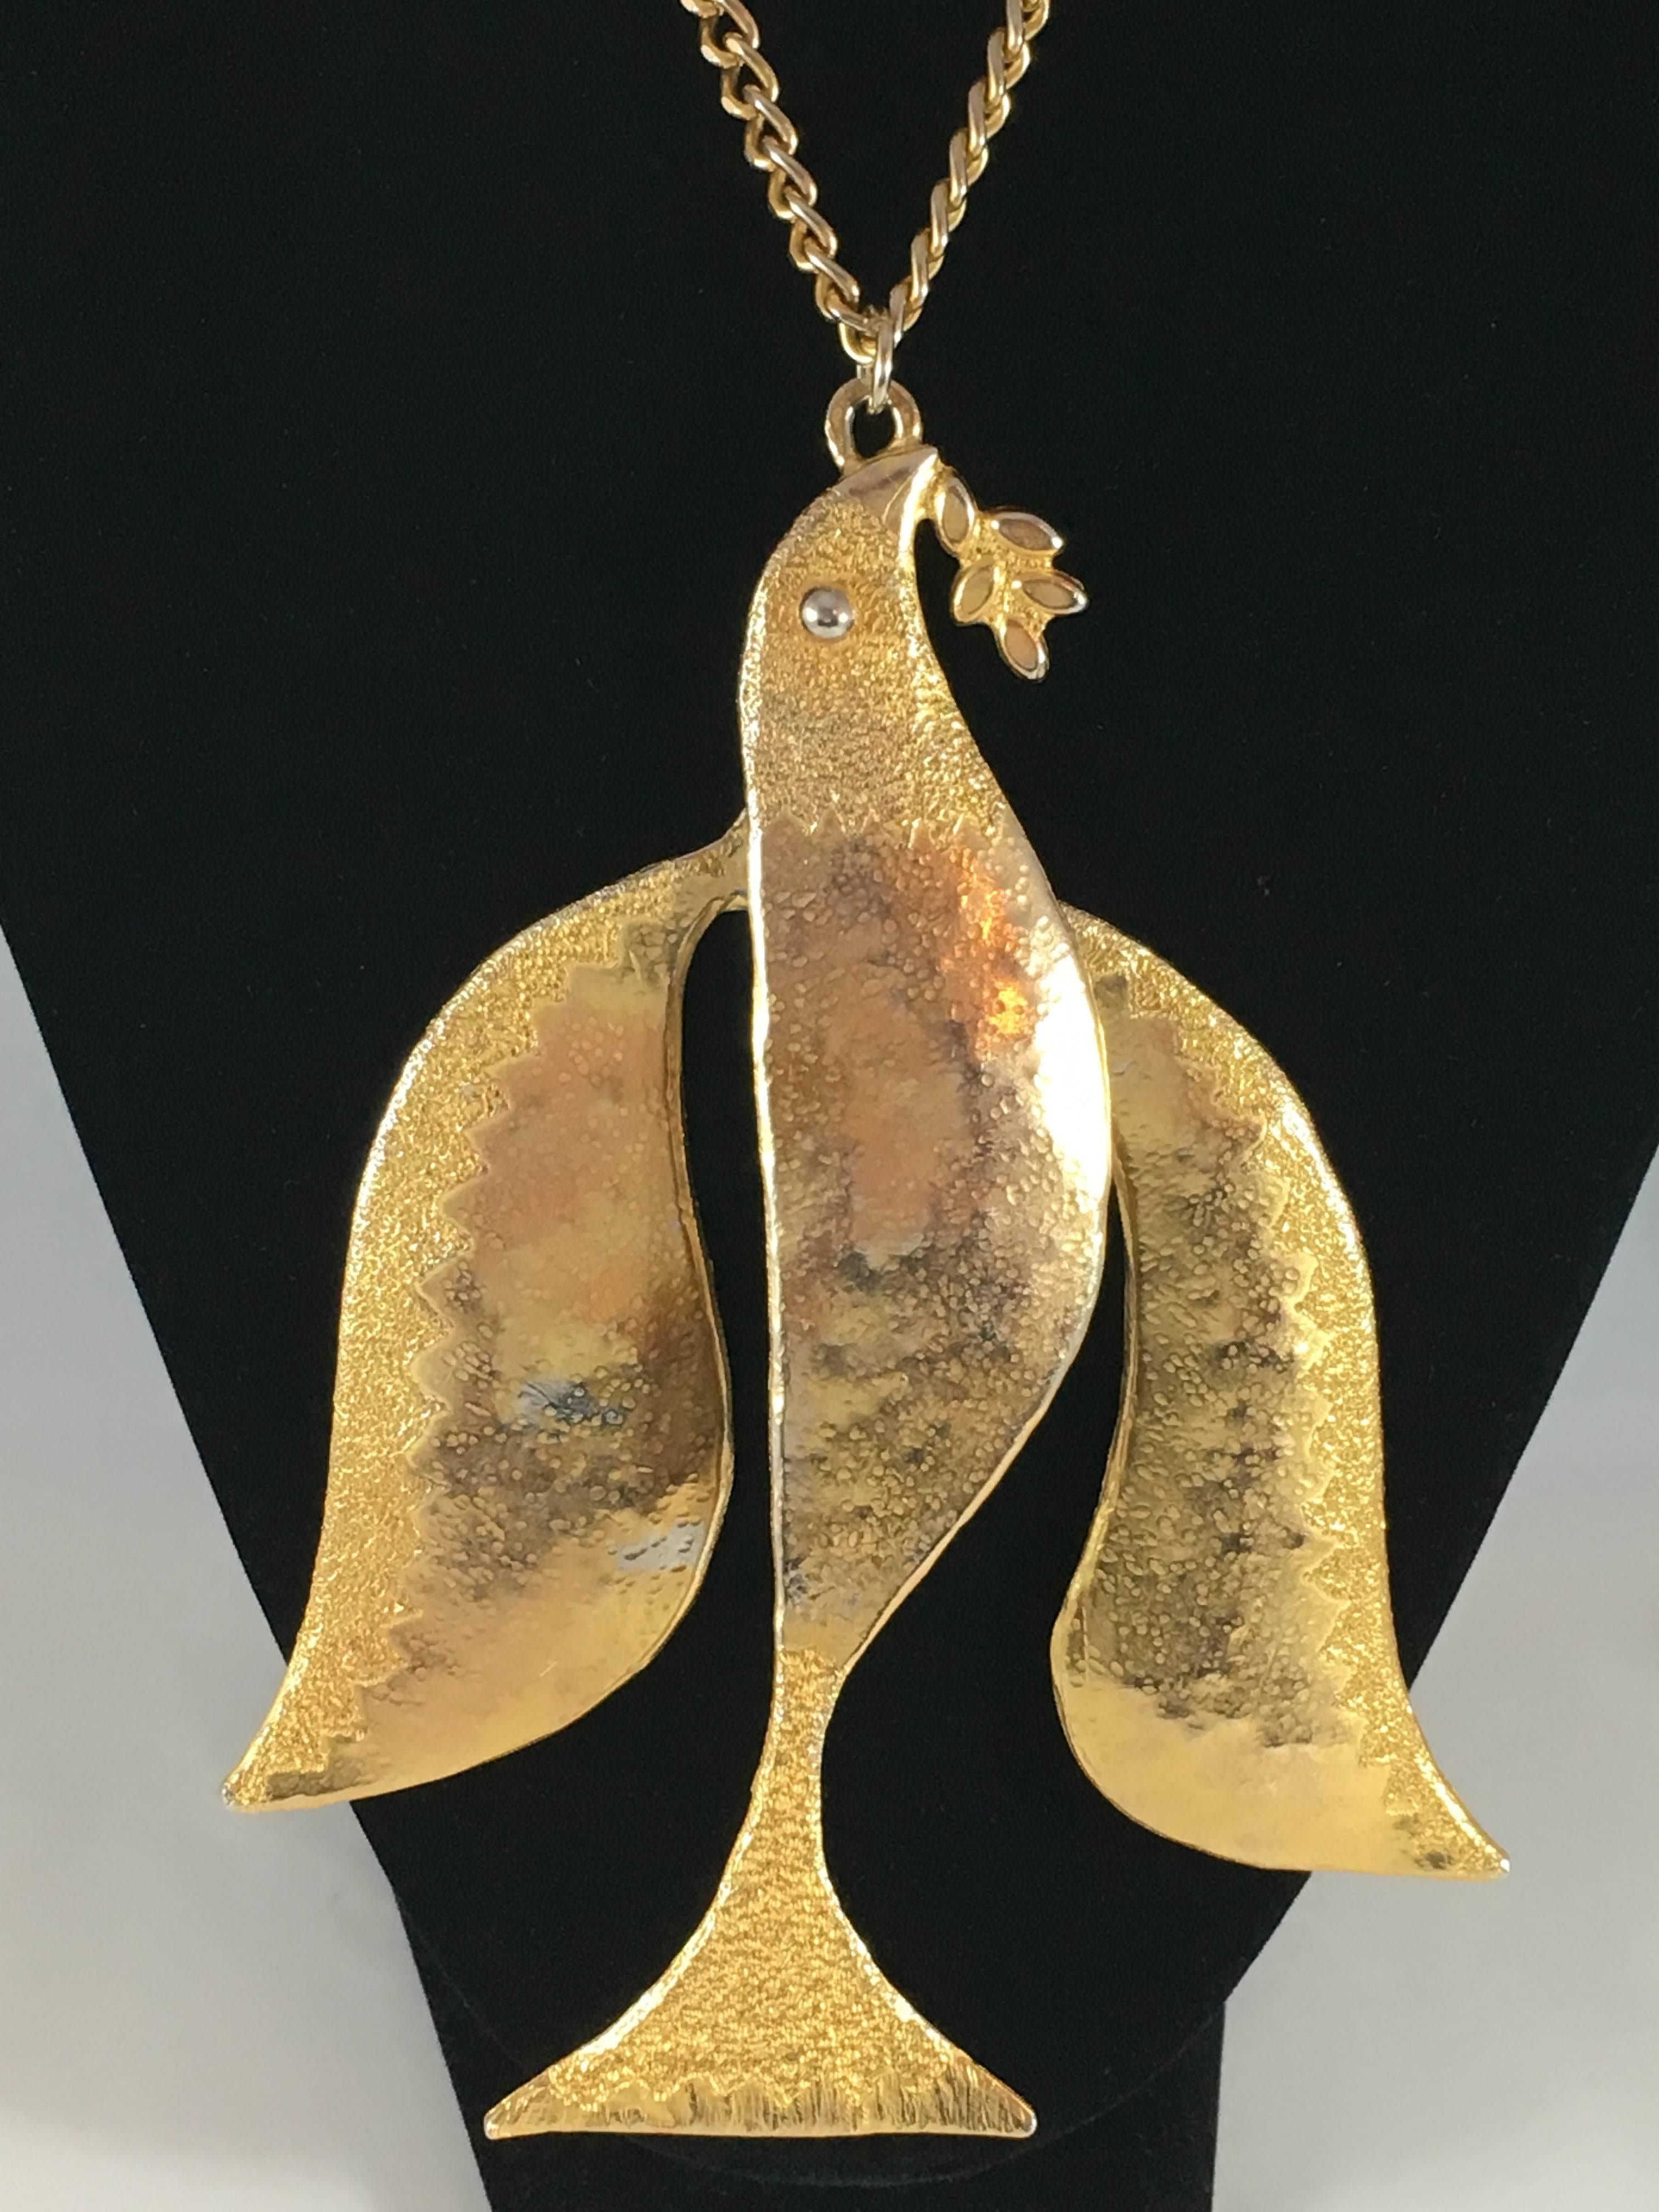 This is a rare 1970s dove pendant necklace from Kenneth Jay Lane. The pendant is huge. It measures 6 3/8 inches long and features a dove holding an olive branch in its mouth. The widest part measures 5 1/2 inches. It is made up of three articulated